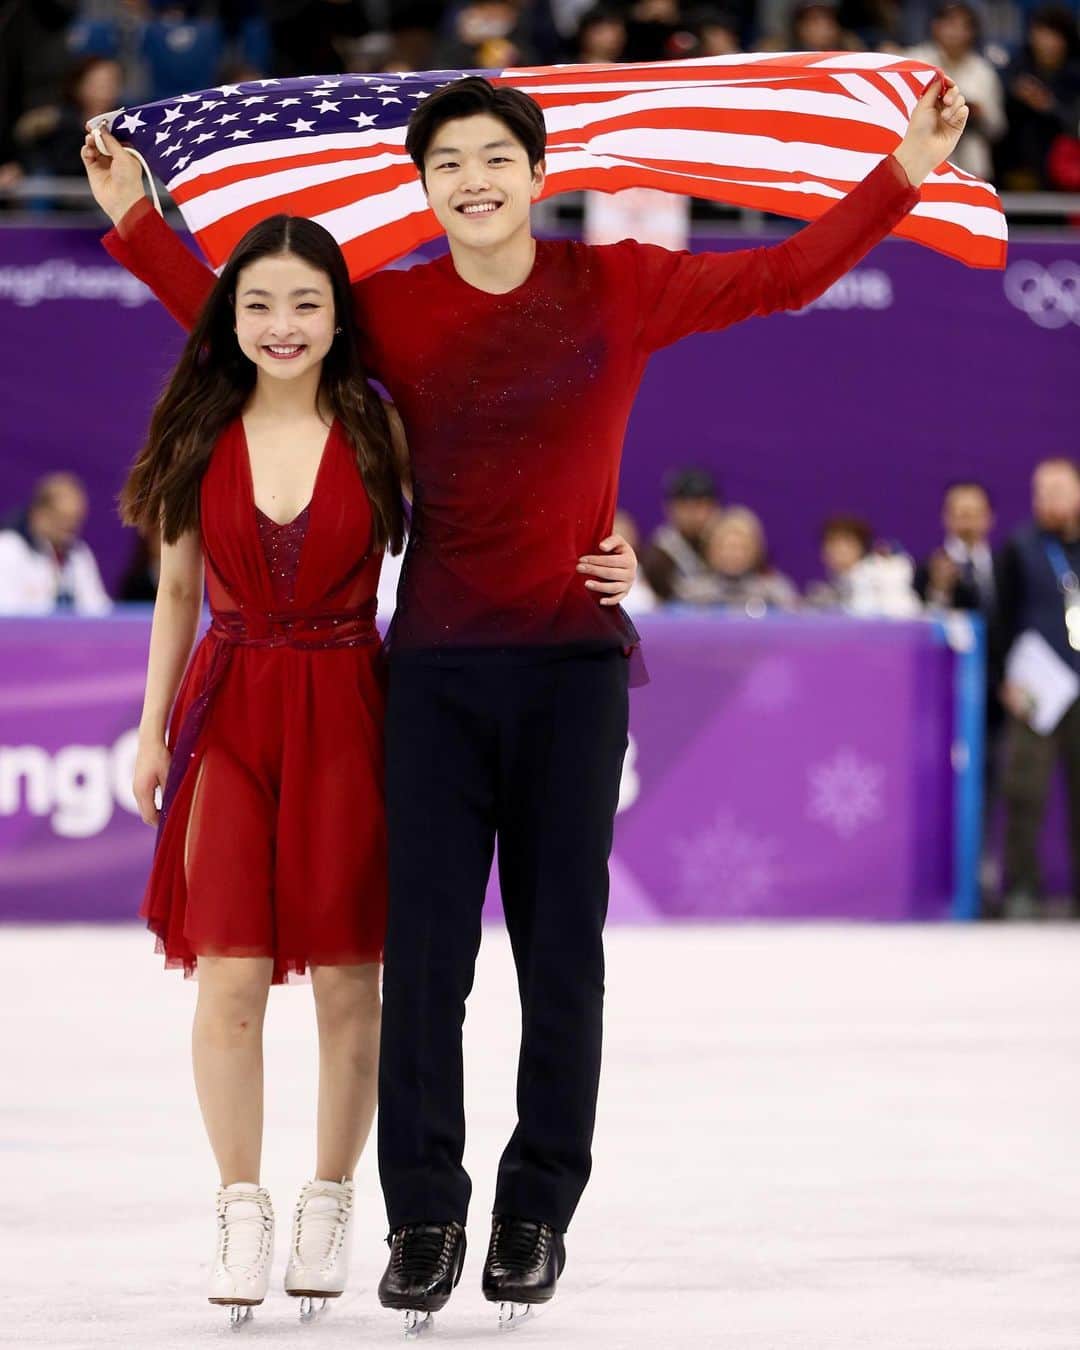 マイア・シブタニさんのインスタグラム写真 - (マイア・シブタニInstagram)「Two years ago today, @alexshibutani and I won our second Olympic medal in PyeongChang. I can remember everything about that day. I’ll always be so proud that rather than allowing ourselves to be overwhelmed, we had the performance of our dreams. There was an incredible amount of pressure and no room for errors, but we stayed present and had one of those magical Olympic moments.  Today, I went to the gym for the first time since my surgery in December. On my way there, it really hit me that I was working out for the first time in months on the anniversary of such an important and memorable day in my life.  I was already anxious about getting started again, but it was emotionally overwhelming to contrast the elation I felt two years ago at the Olympics with the uncertainty that I felt this morning.  My body feels weak – I am not in the physical shape that I’m used to being in. Since I kept working to get stronger following the Olympics, I was in the best shape of my life before my surgery. I think that the last time I took a break longer than a week from training was when I was four or five years old (not even kidding). This morning, rather than being proud of the progress I’ve made with my health and embracing the special significance of today, I was comparing myself to where I was two years ago.  Thankfully, I have a great support system that encouraged me, lifted me up, and reminded me to adjust my perspective. My workout was better than I expected. I stopped judging myself and instead focused on embracing the moment. Some days are tougher than others, but I’m learning and growing so much from the challenges of these past few months. Everything won’t change right away and I need to continue to be patient, but today was a special reminder to celebrate, love, and be kind to myself.」2月21日 11時49分 - maiashibutani